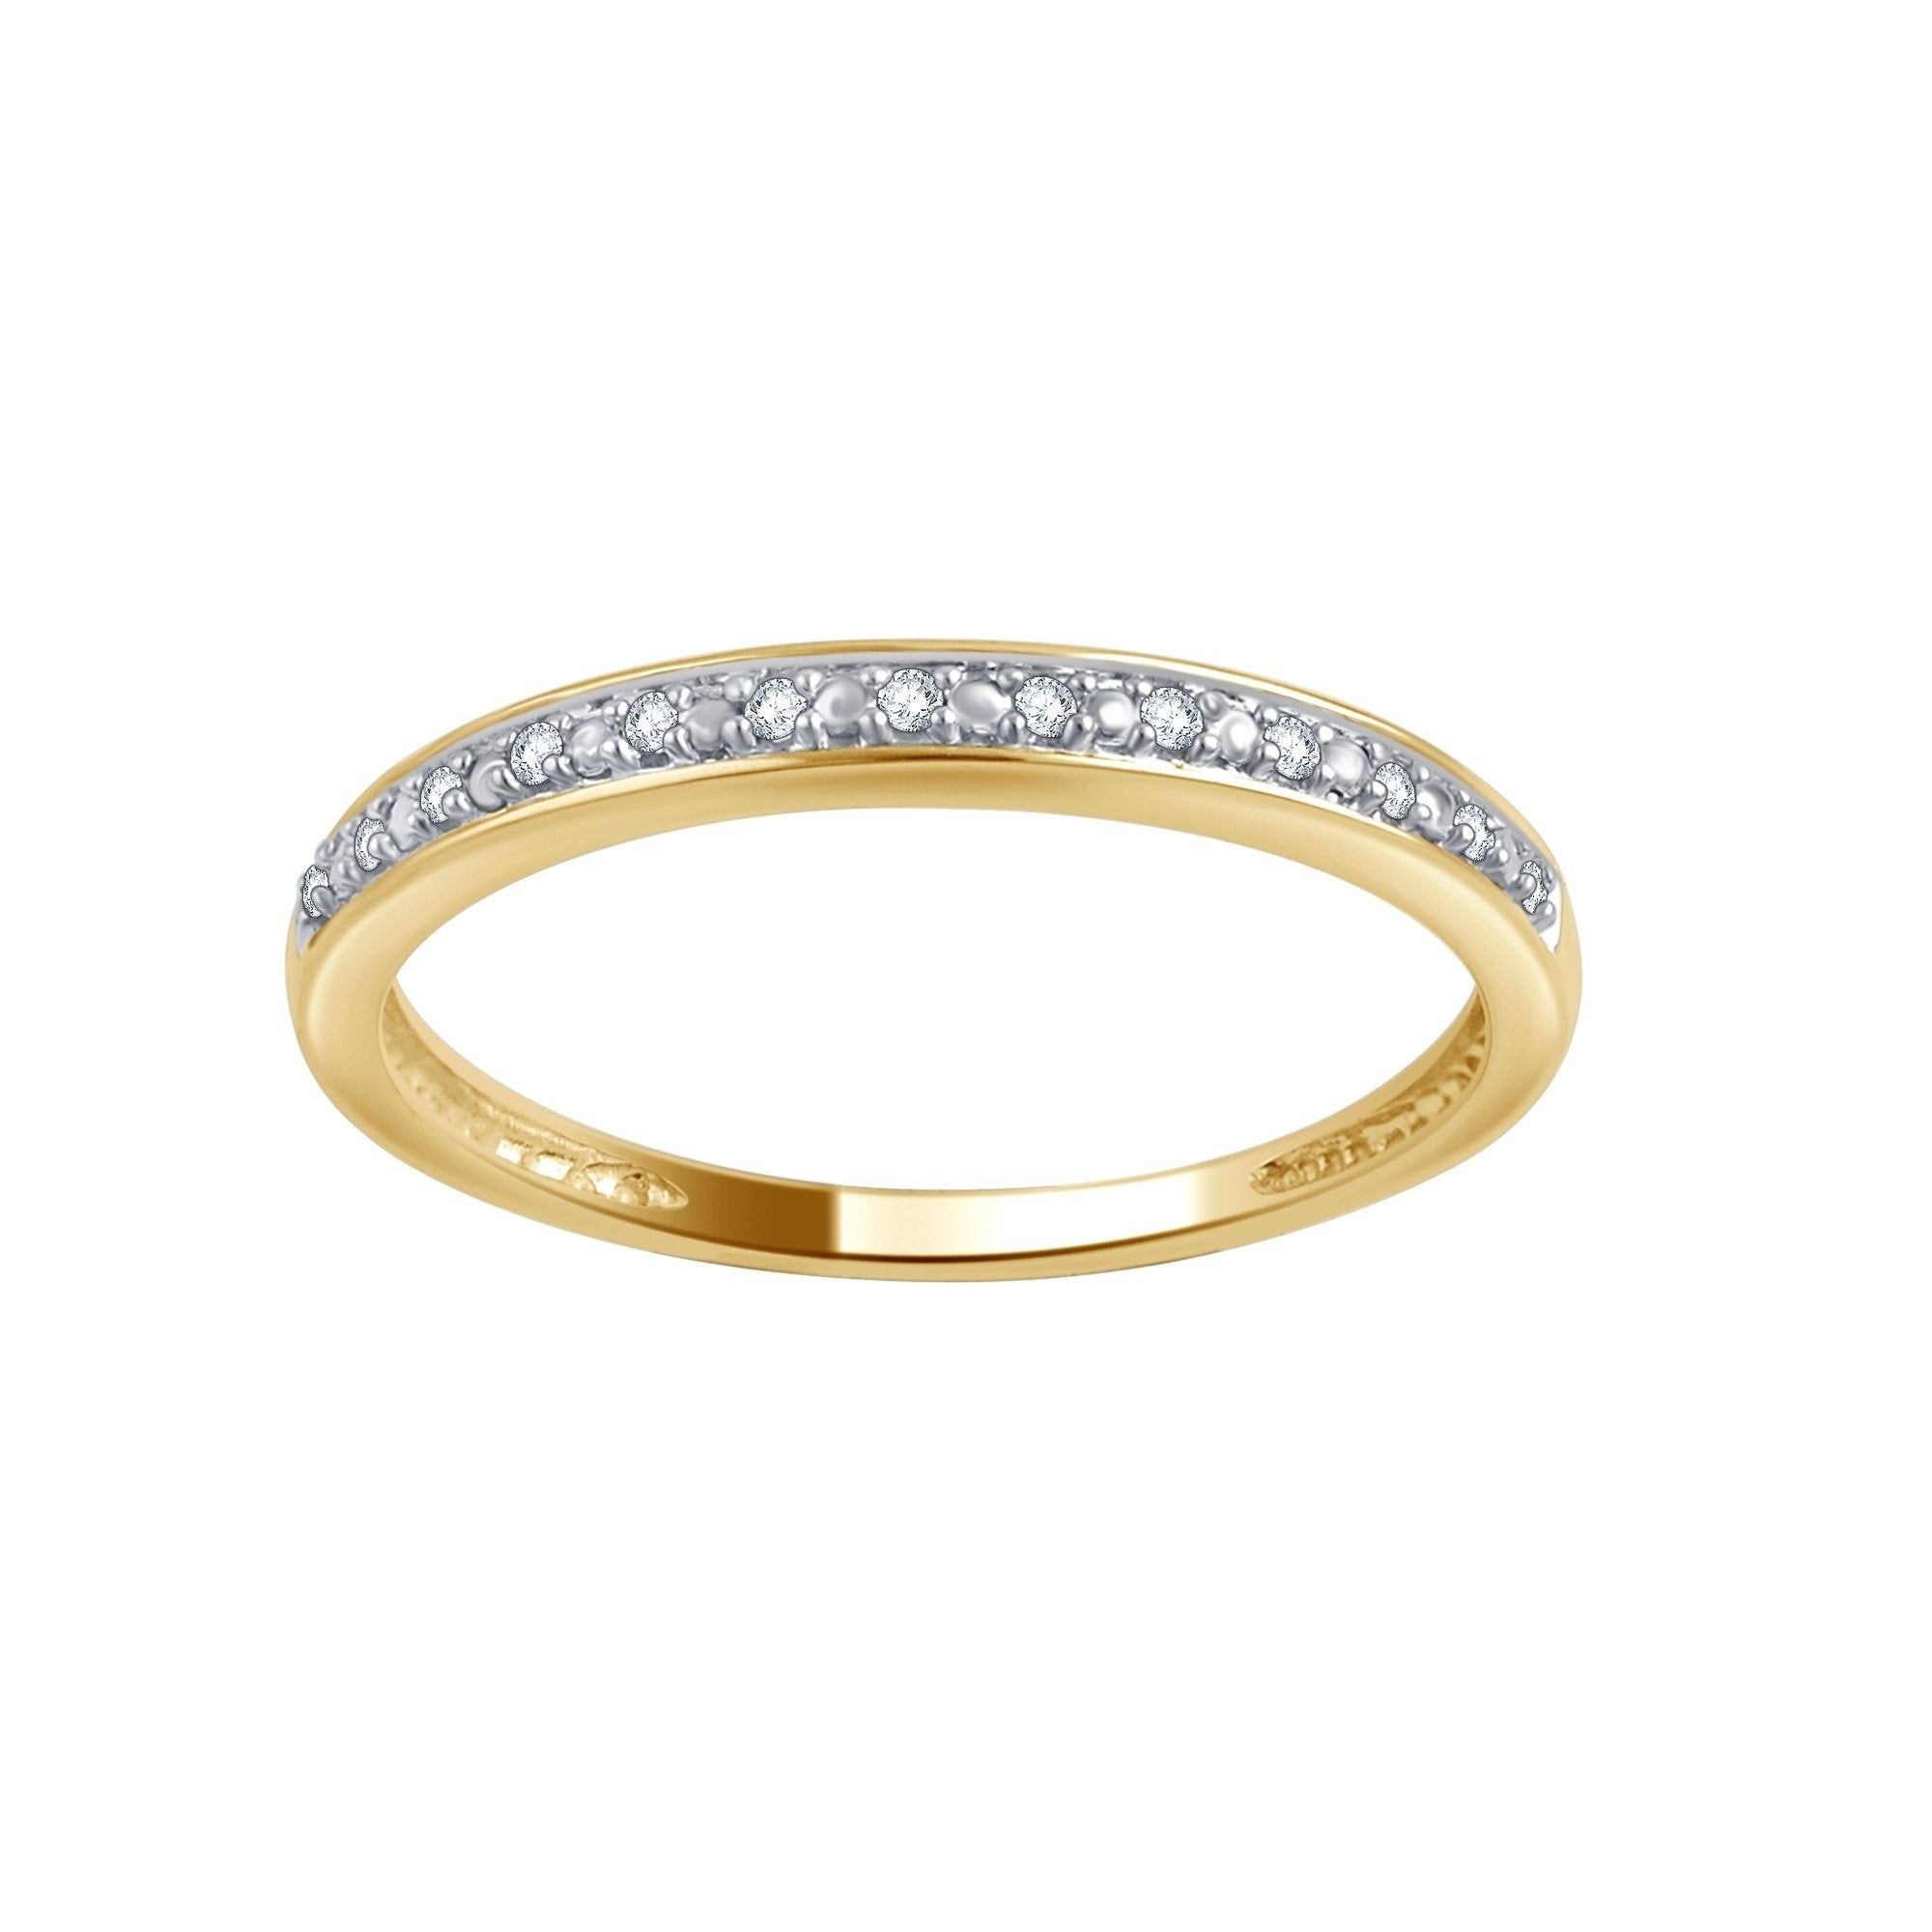 Divina 10kt Gold Diamond Accent Wedding Band Throughout Most Current Diamond Accent Anniversary Bands In Gold (View 11 of 25)